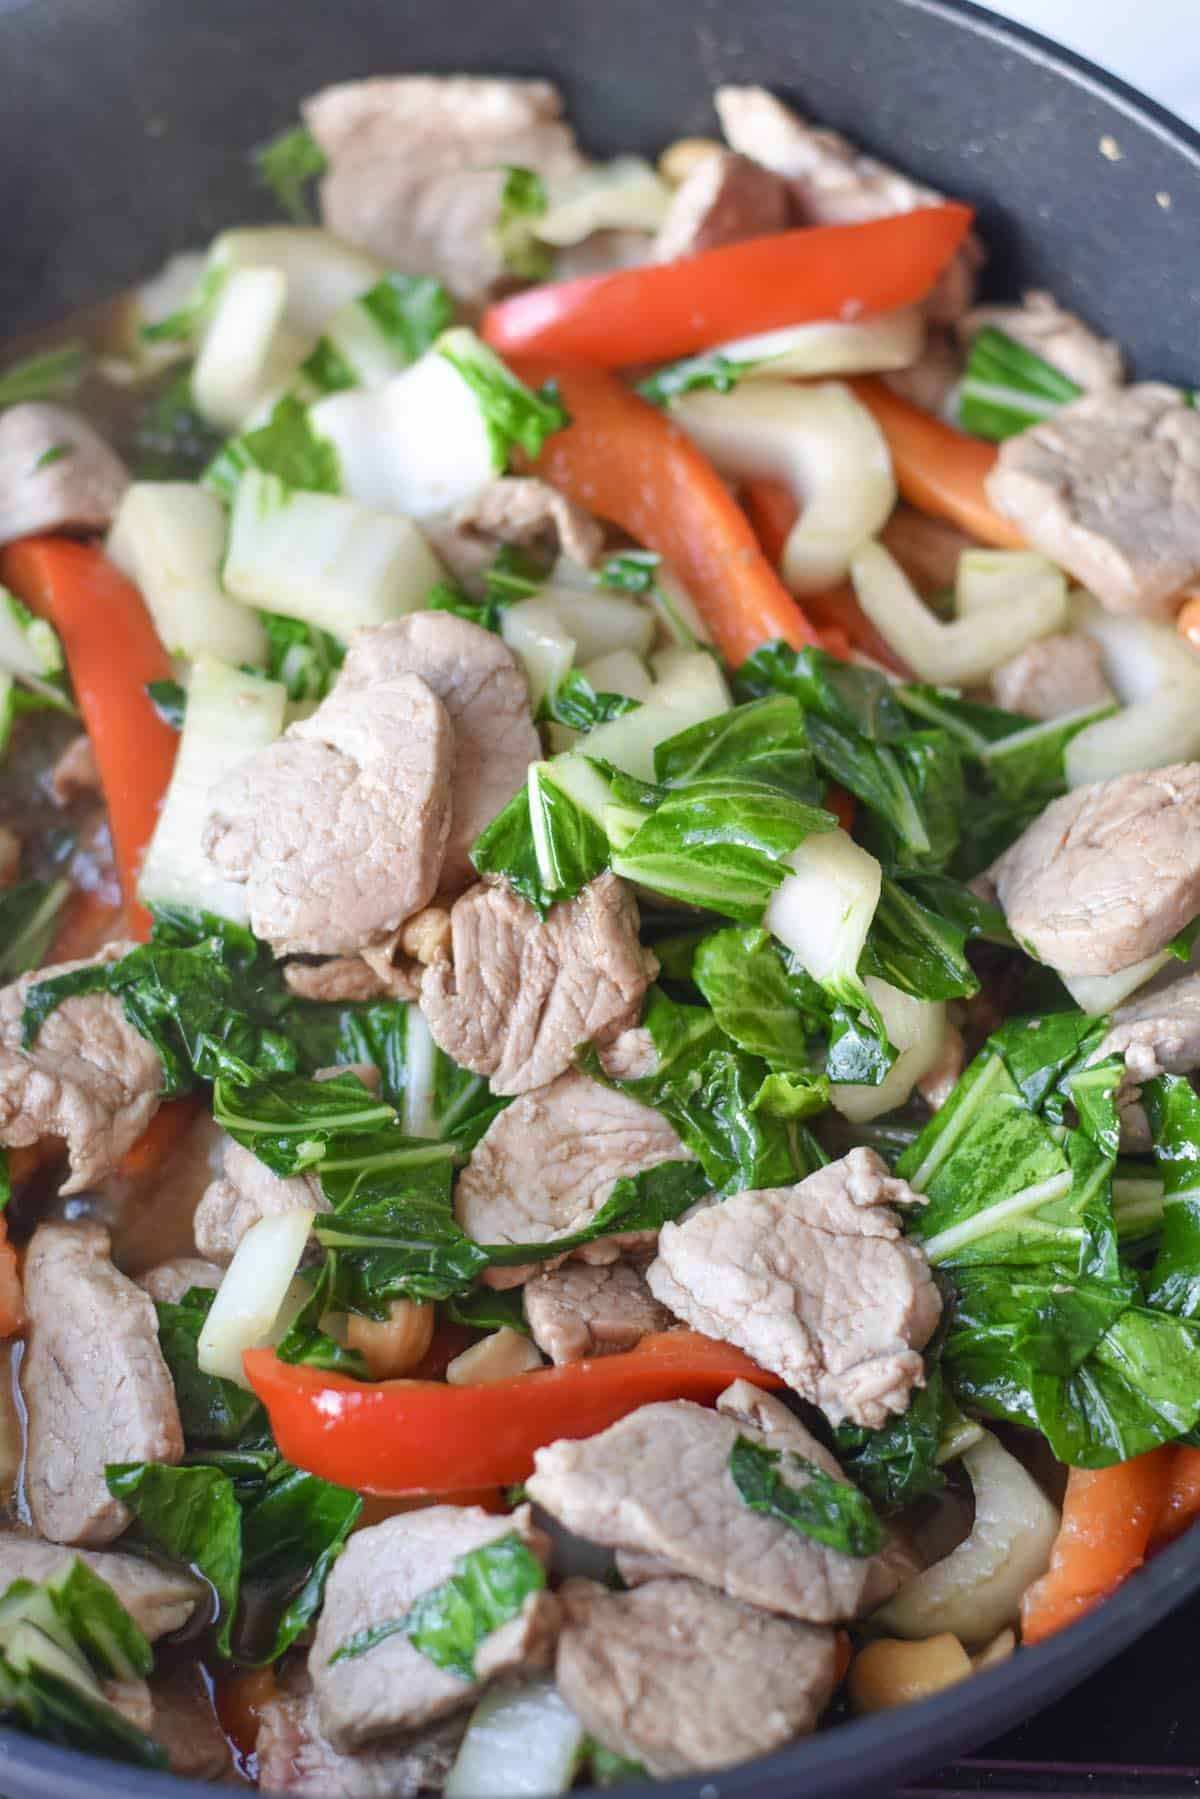 Low carb pork stir fry with bell peppers and bok choy mixed together.